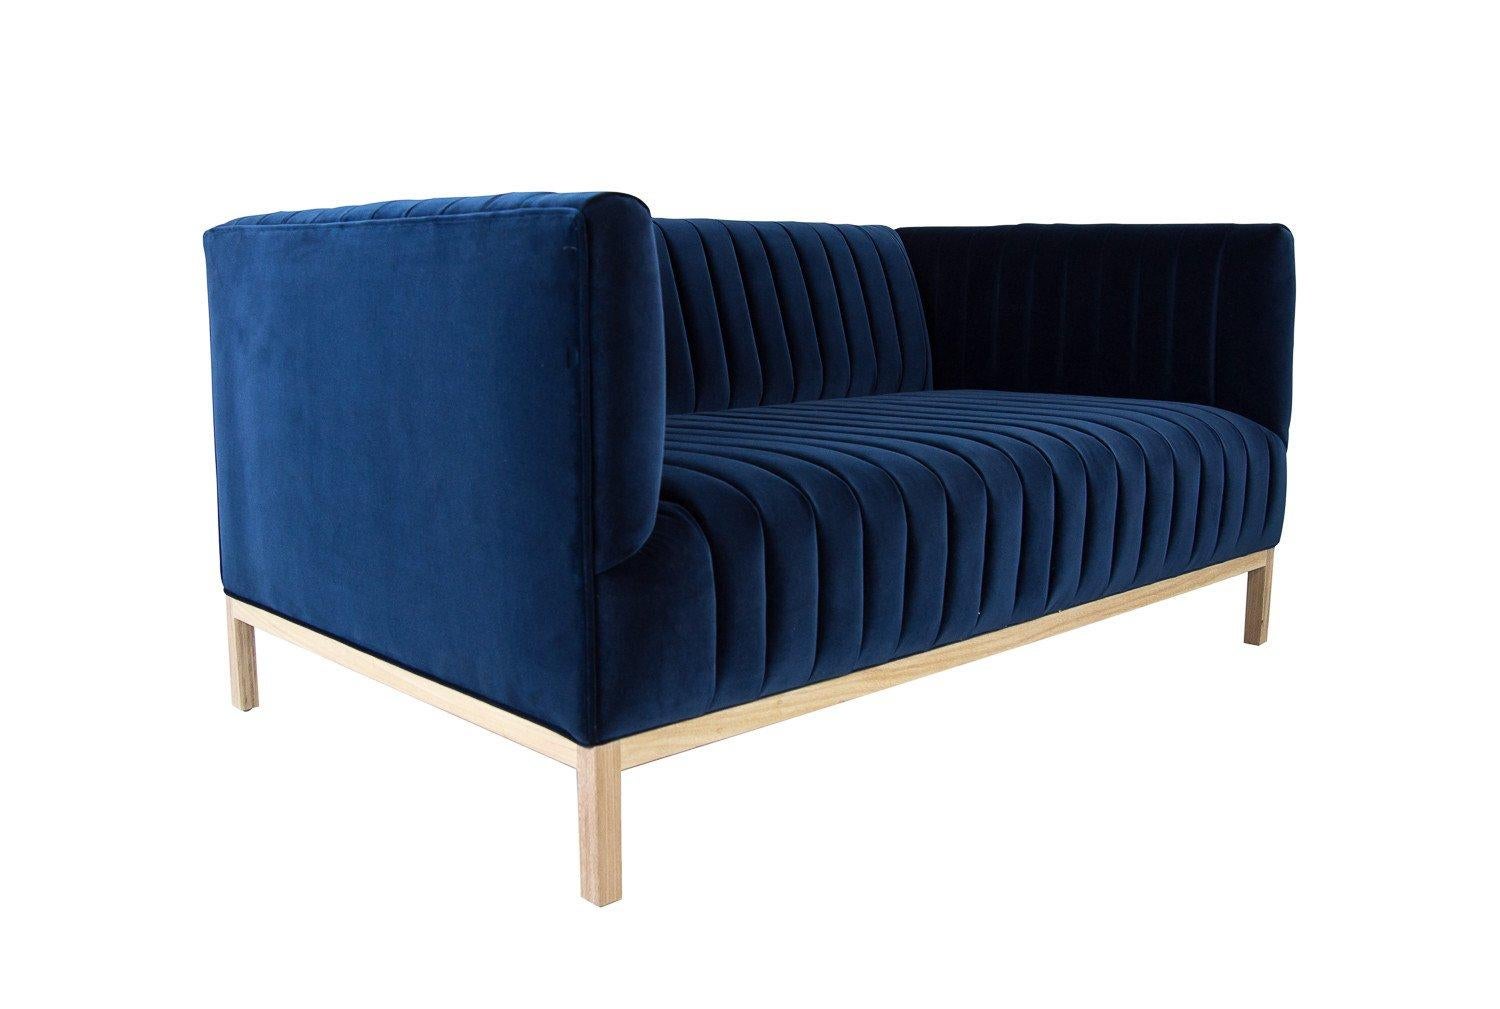 The Manhattan sofa epitomizes the modern loft lifestyle of the 21st century New Yorker. An economy of style and comfort come together in this beautiful, long arm tufted sofa, shown here in Como Indigo Velvet with a solid bleached walnut base. Bring